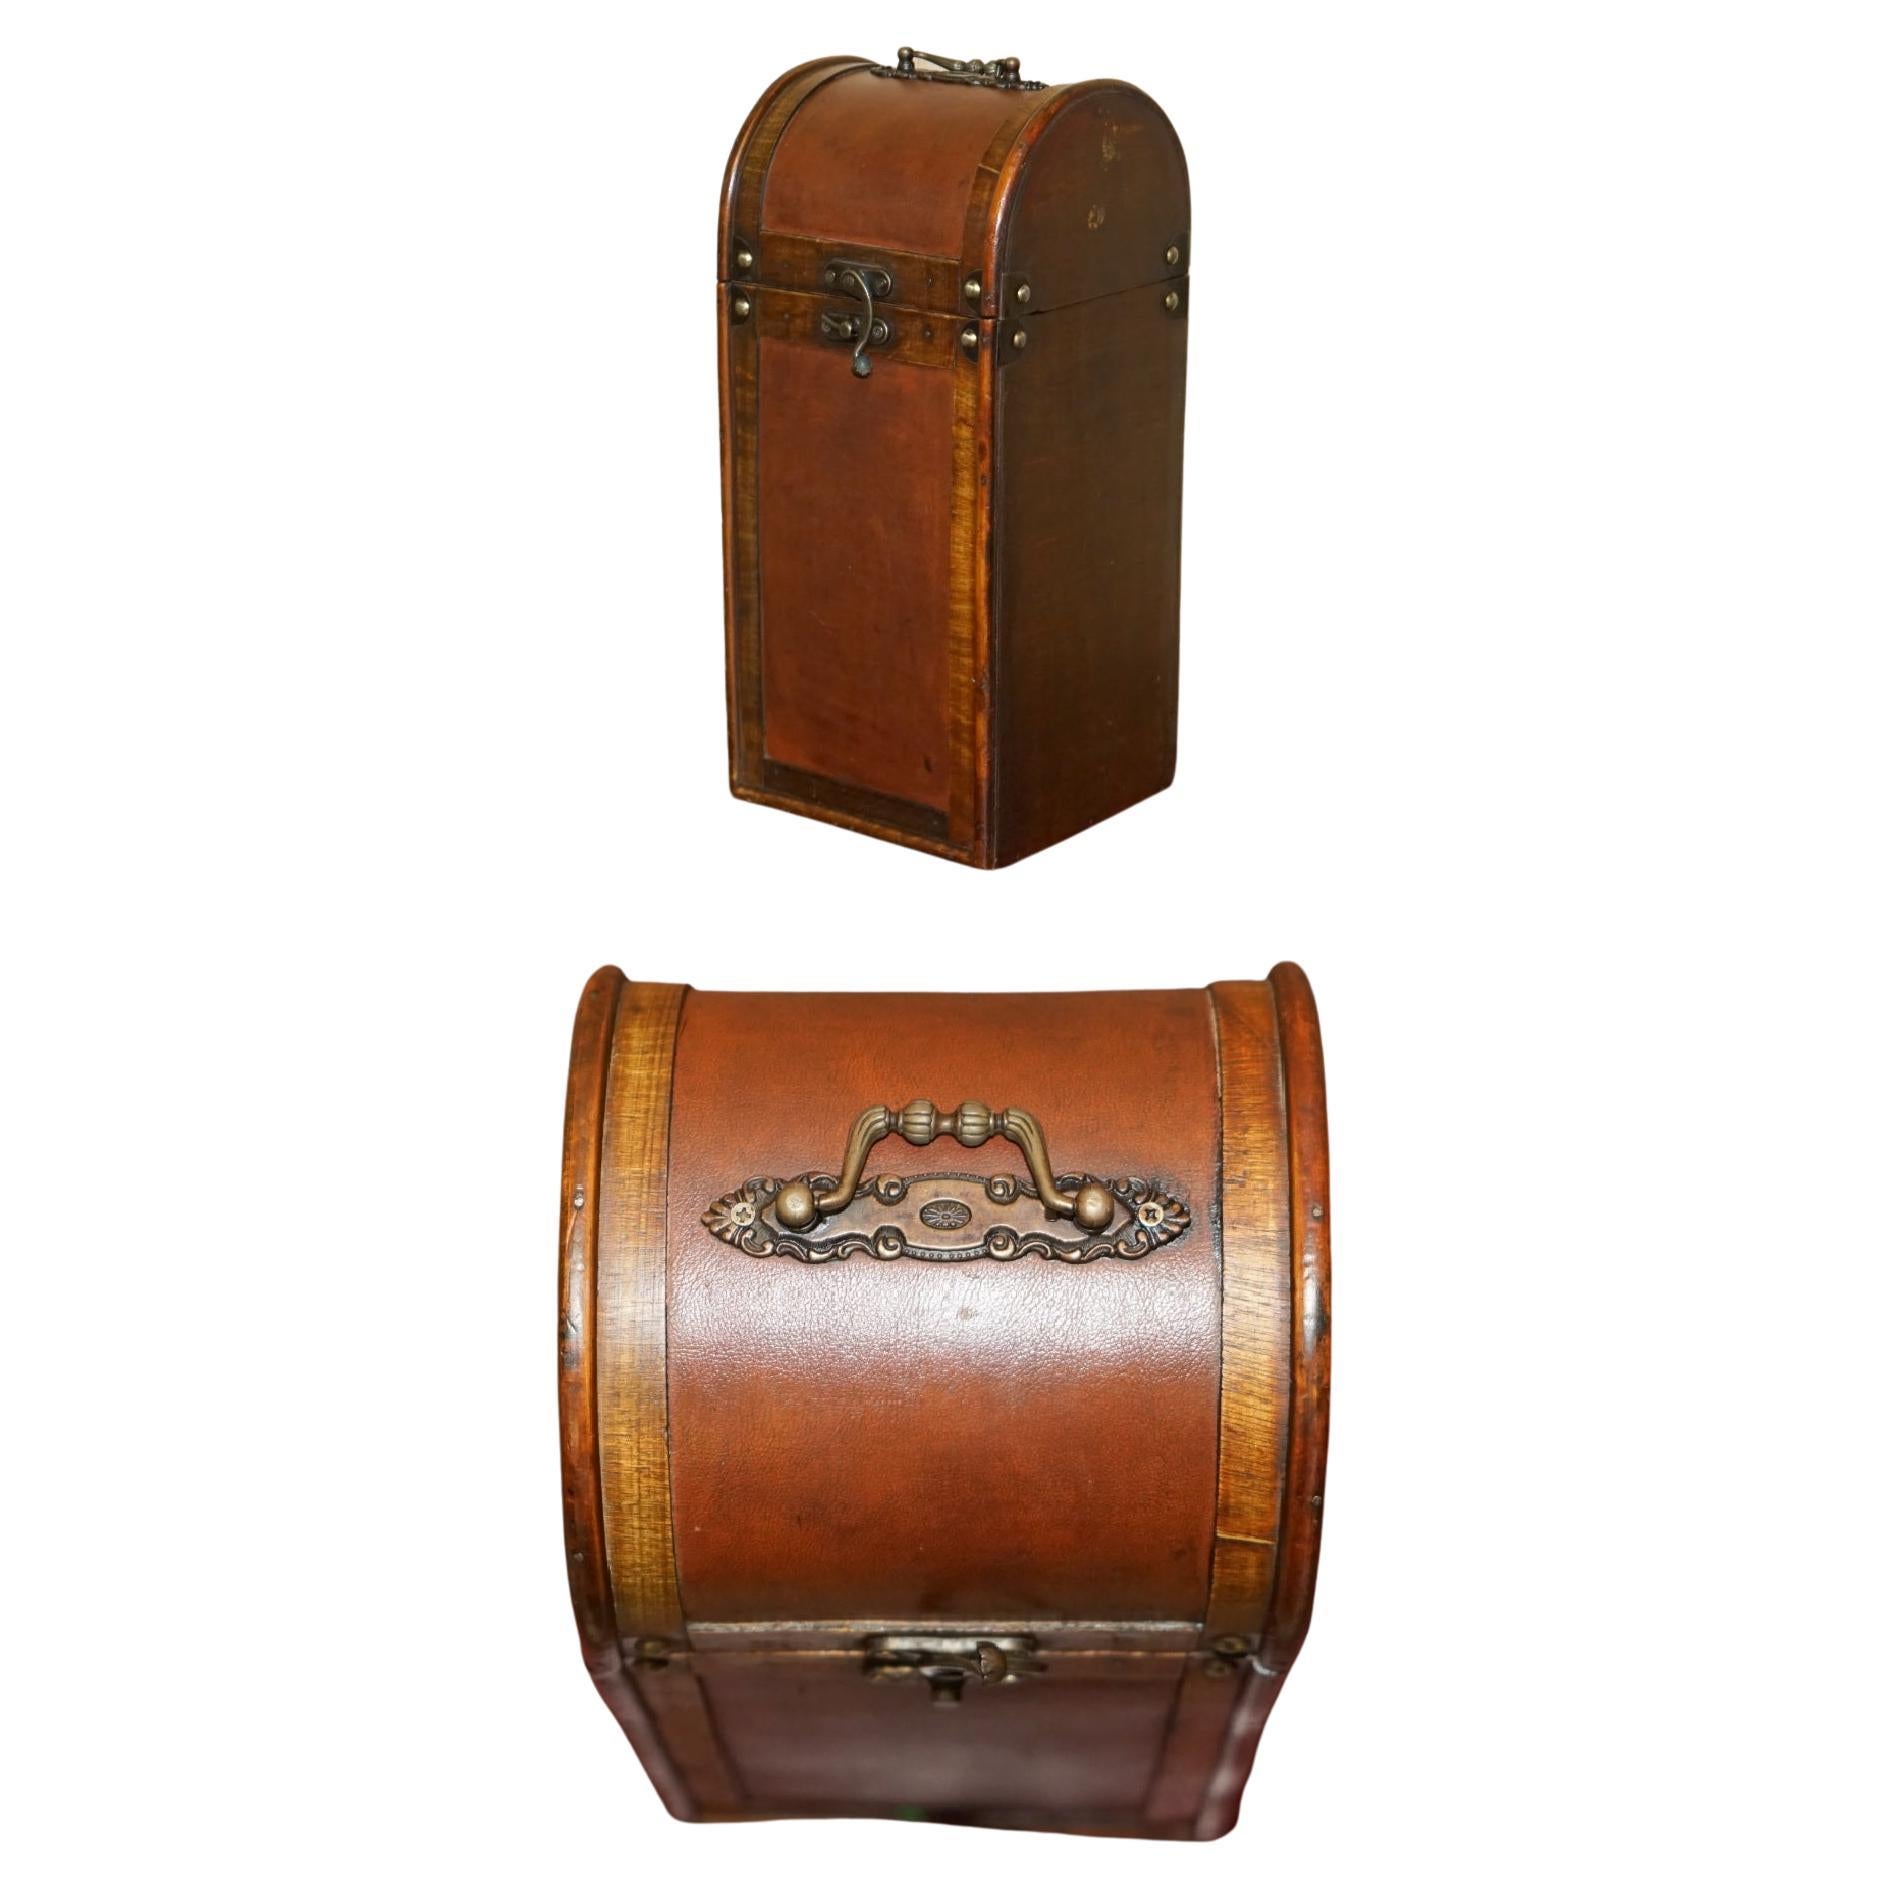 ViNTAGE HARDWOOD TRAVEL WINE BOX CASE WITH HANDLE VERY DECORATIVE PIECE For Sale